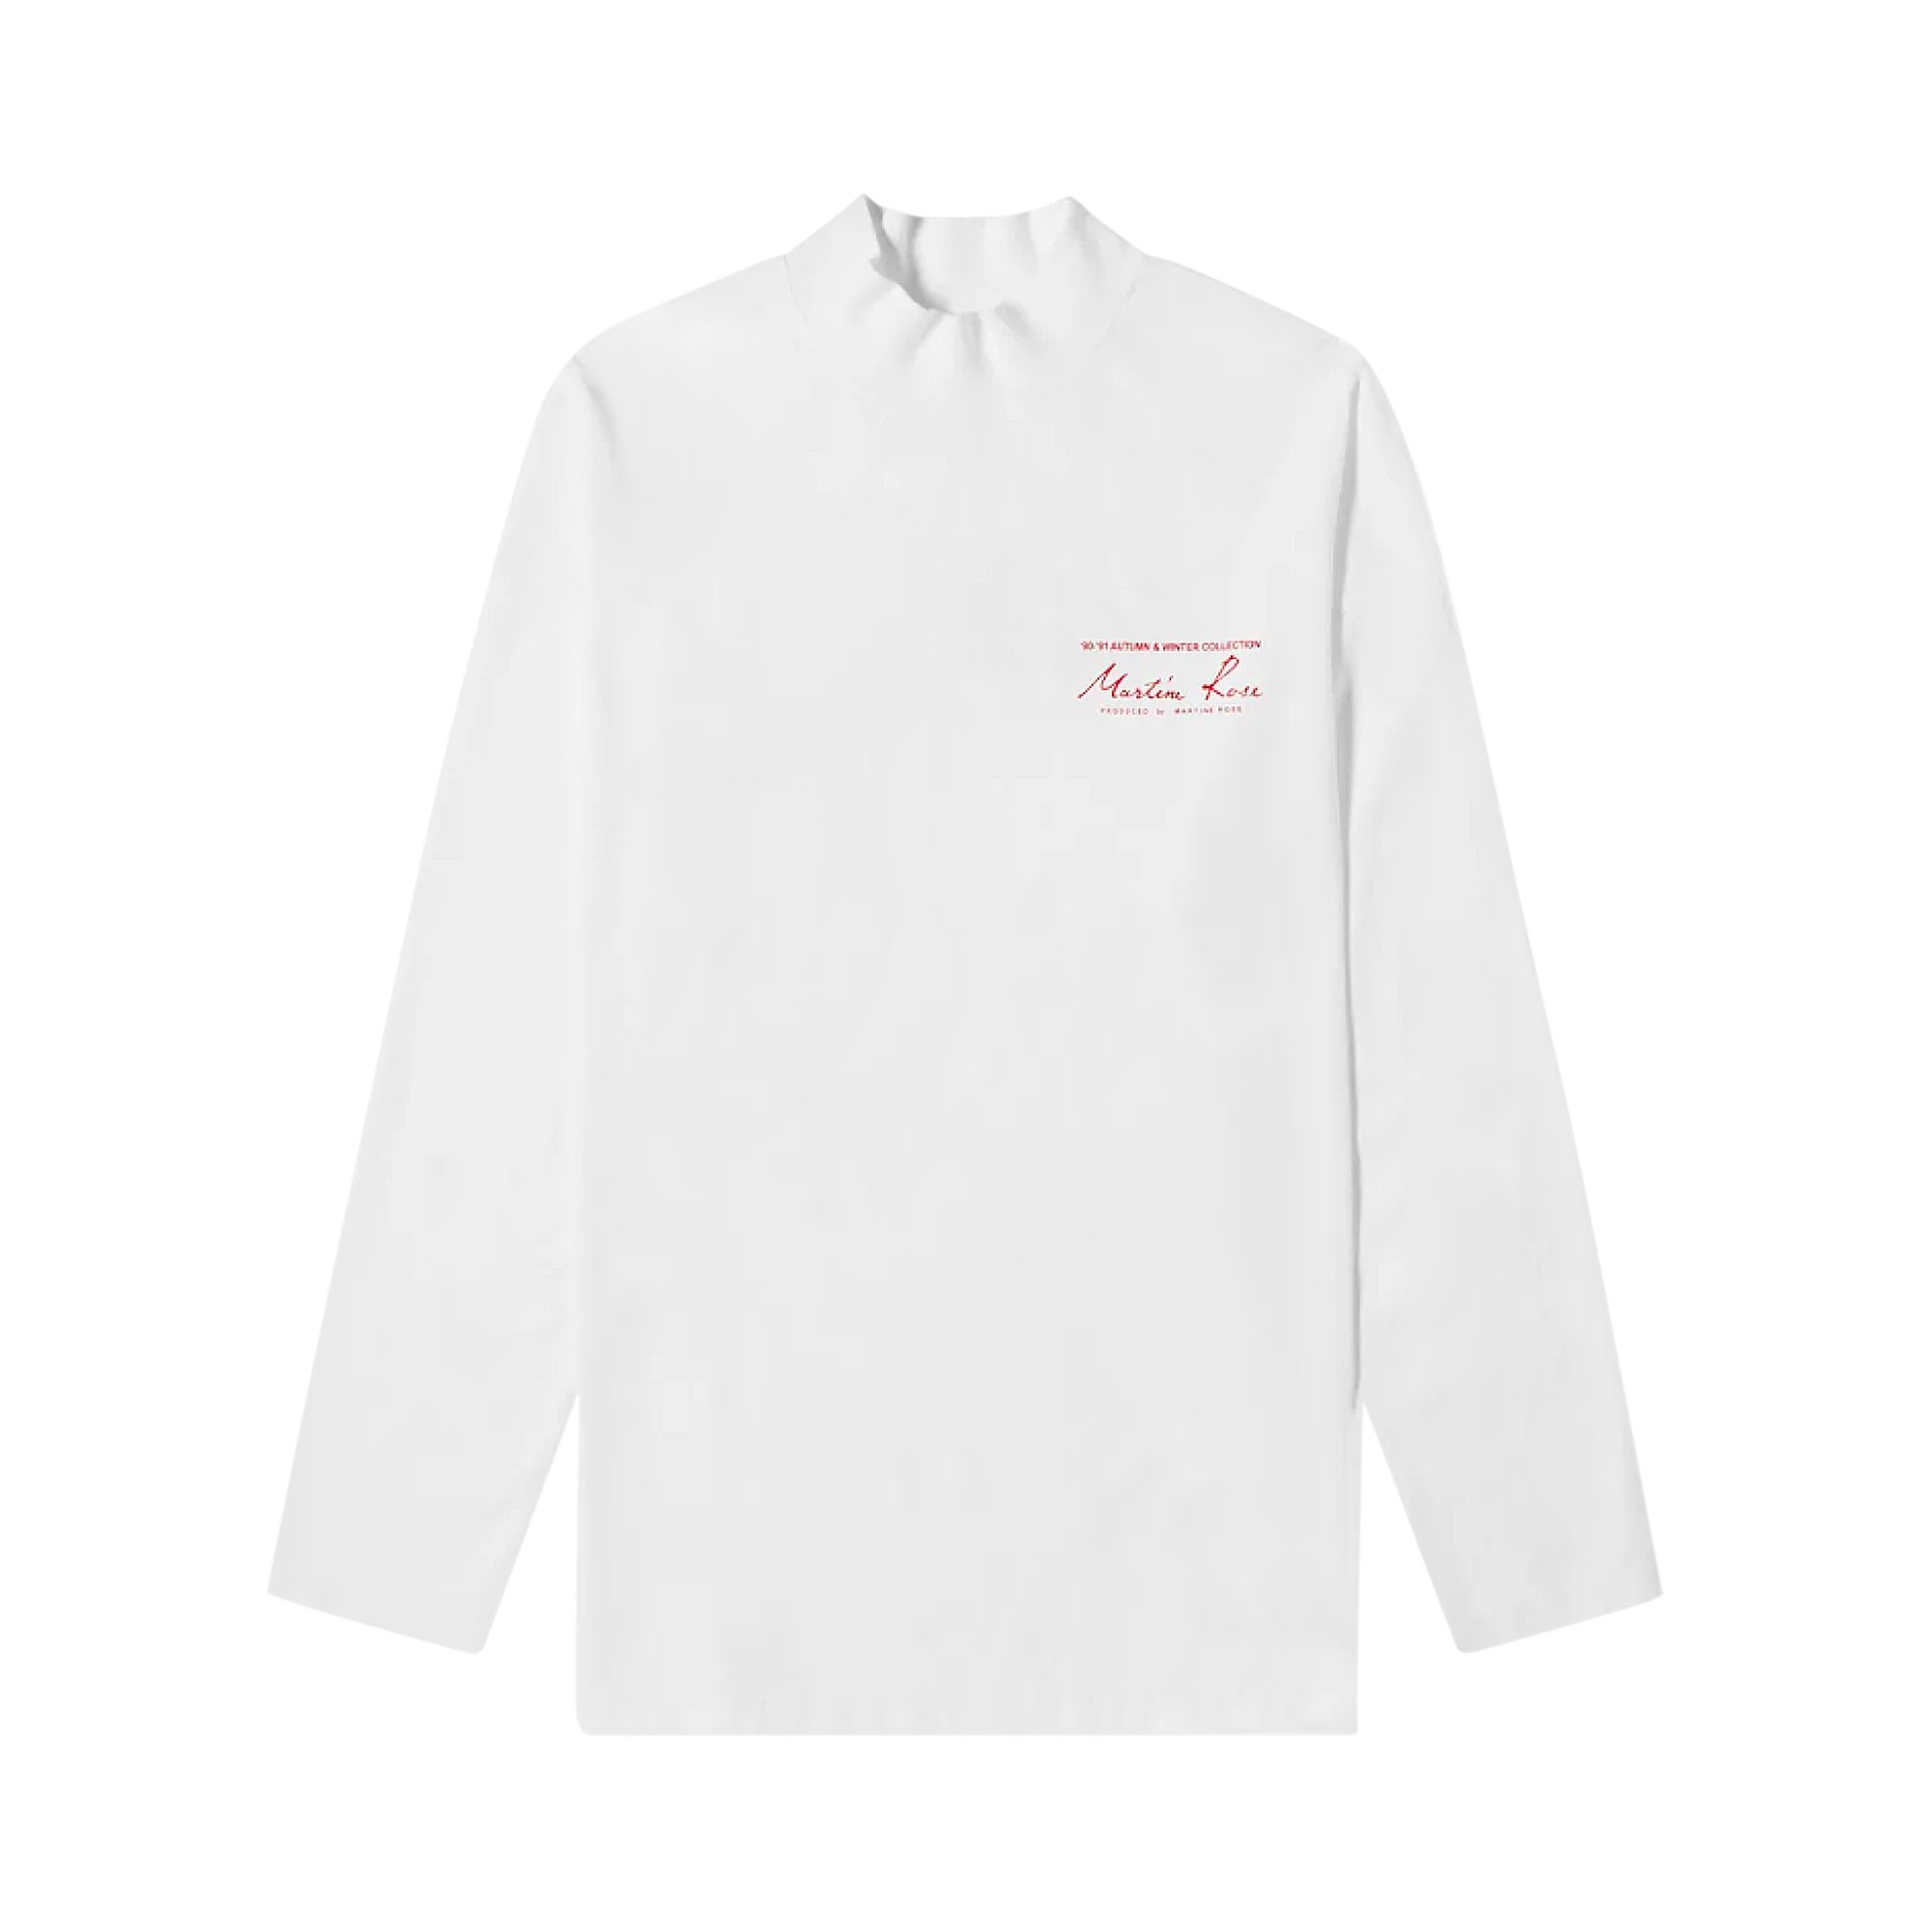 Buy Martine Rose Jersey Funnel Neck 'White' - CMRSS20 605 WHIT | GOAT